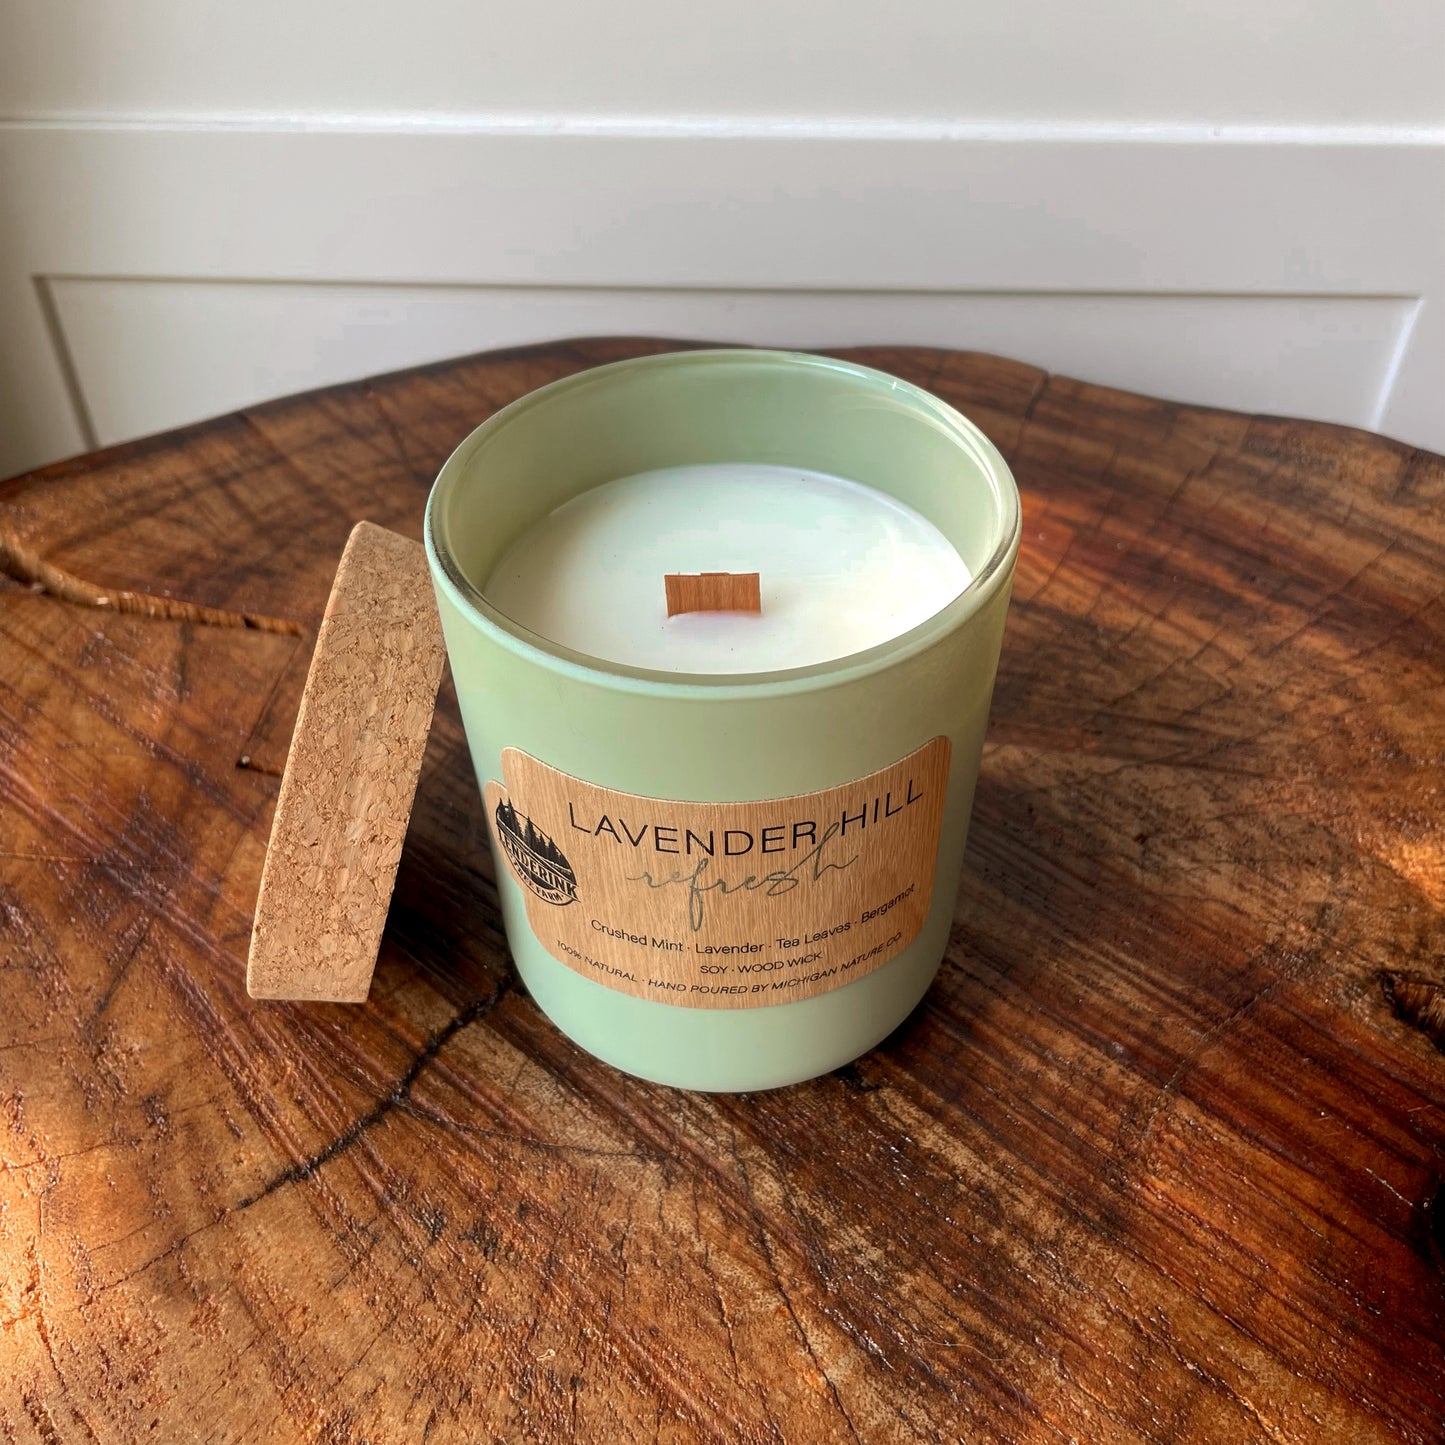 Lavender Hill Refresh - Candle